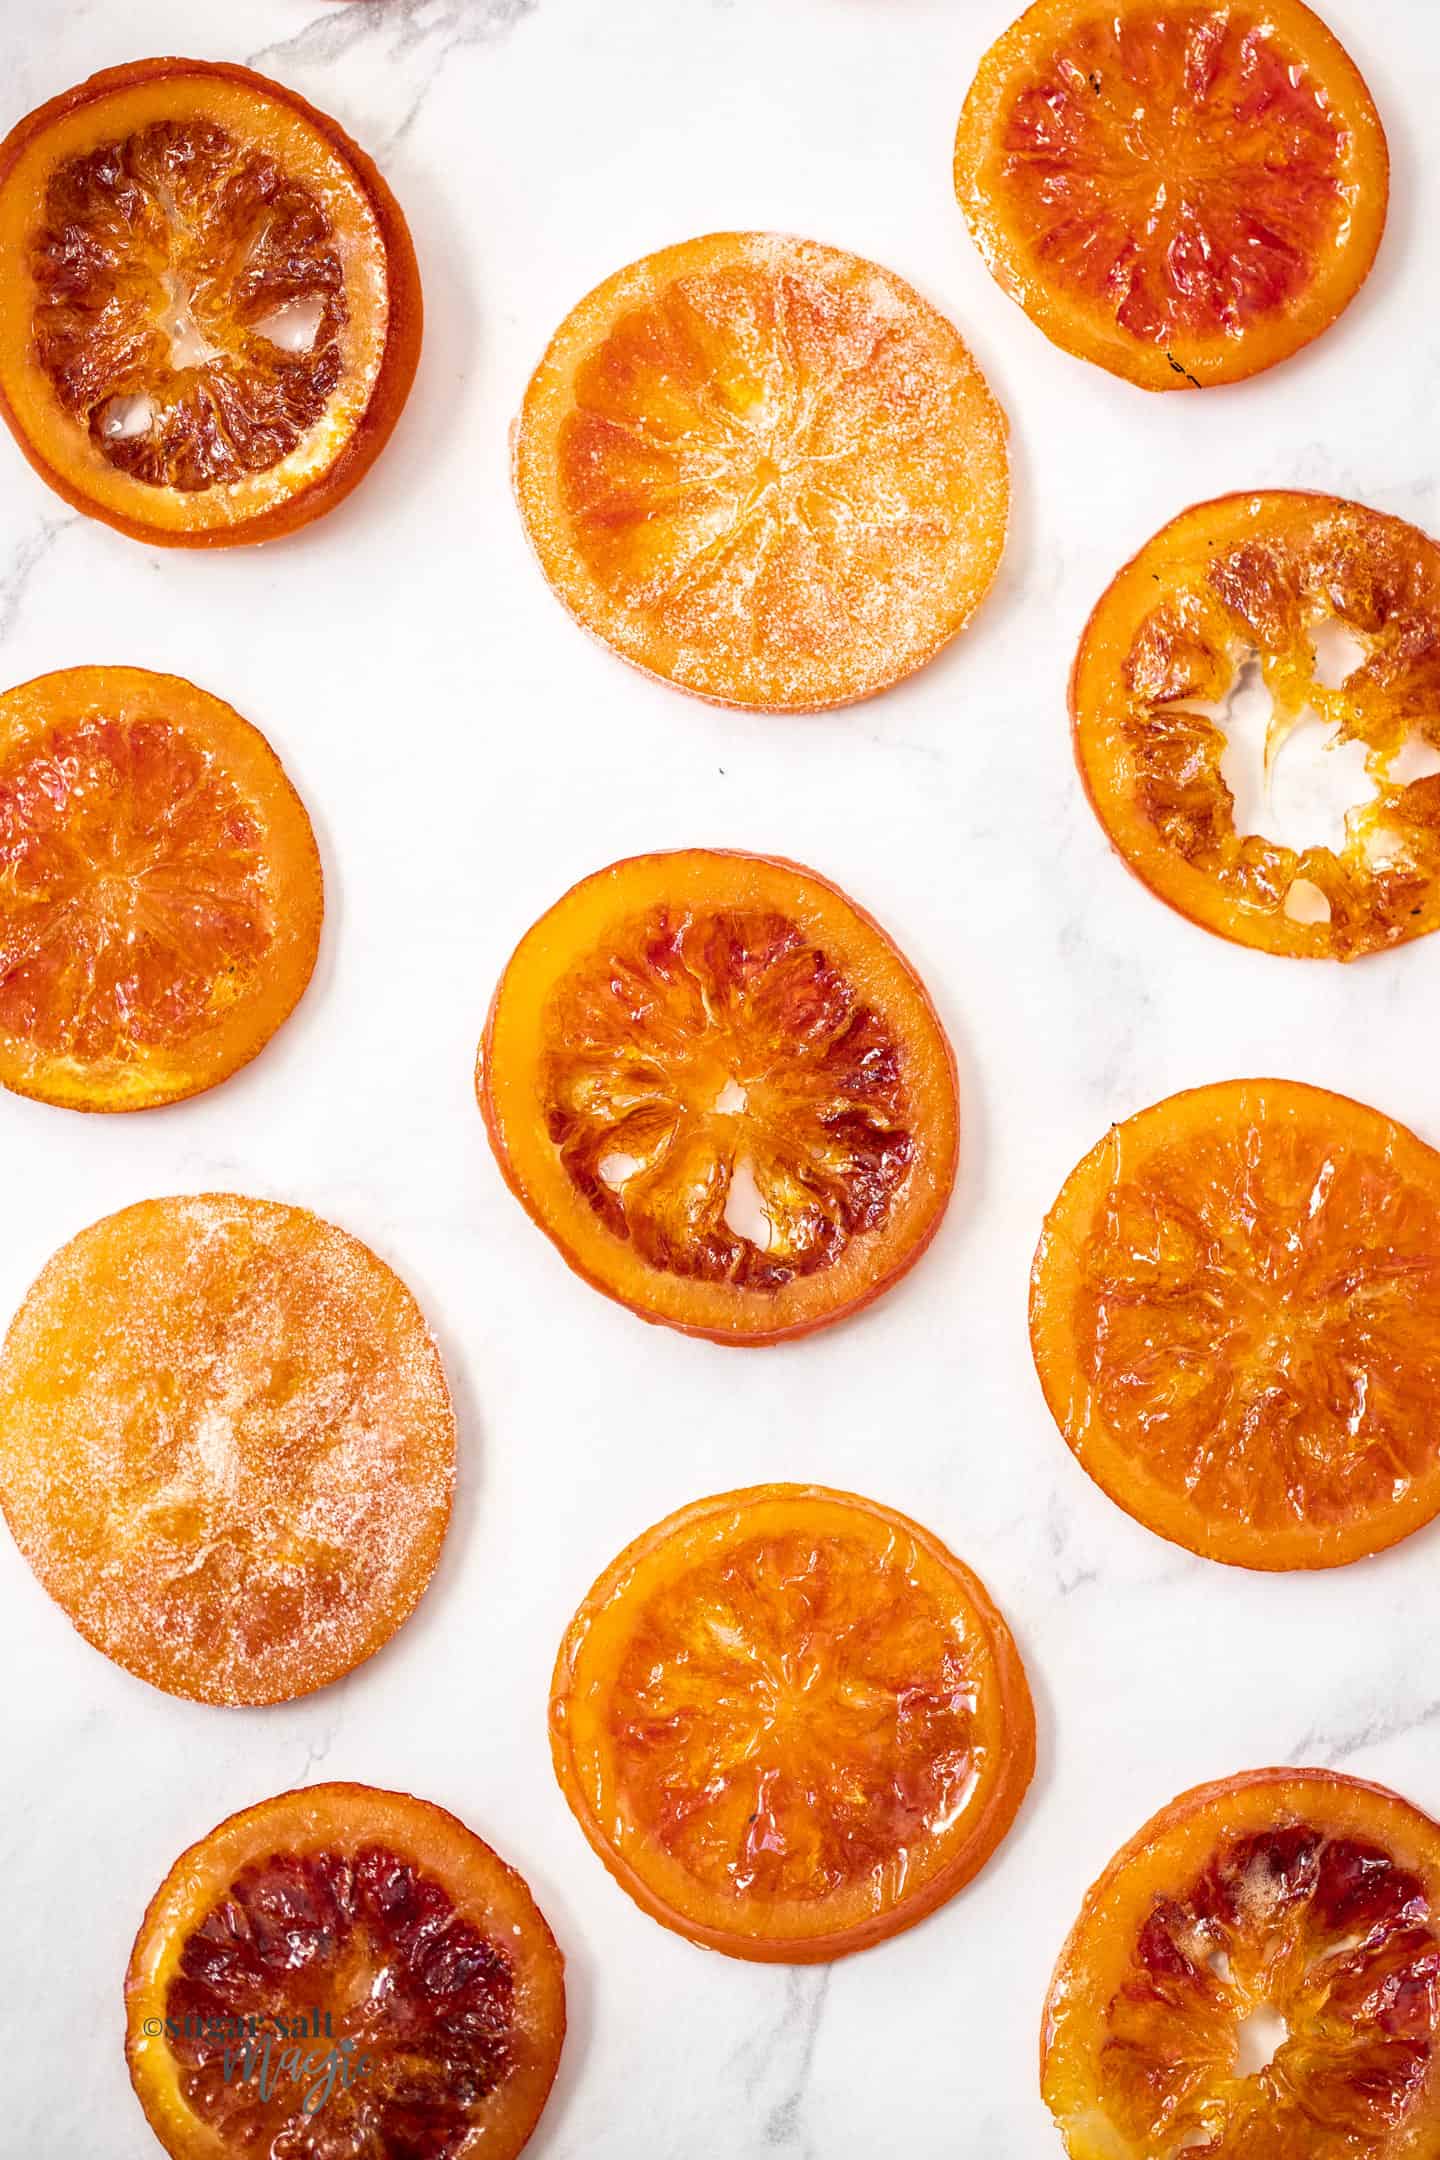 11 candied orange slices on sheet of baking paper.